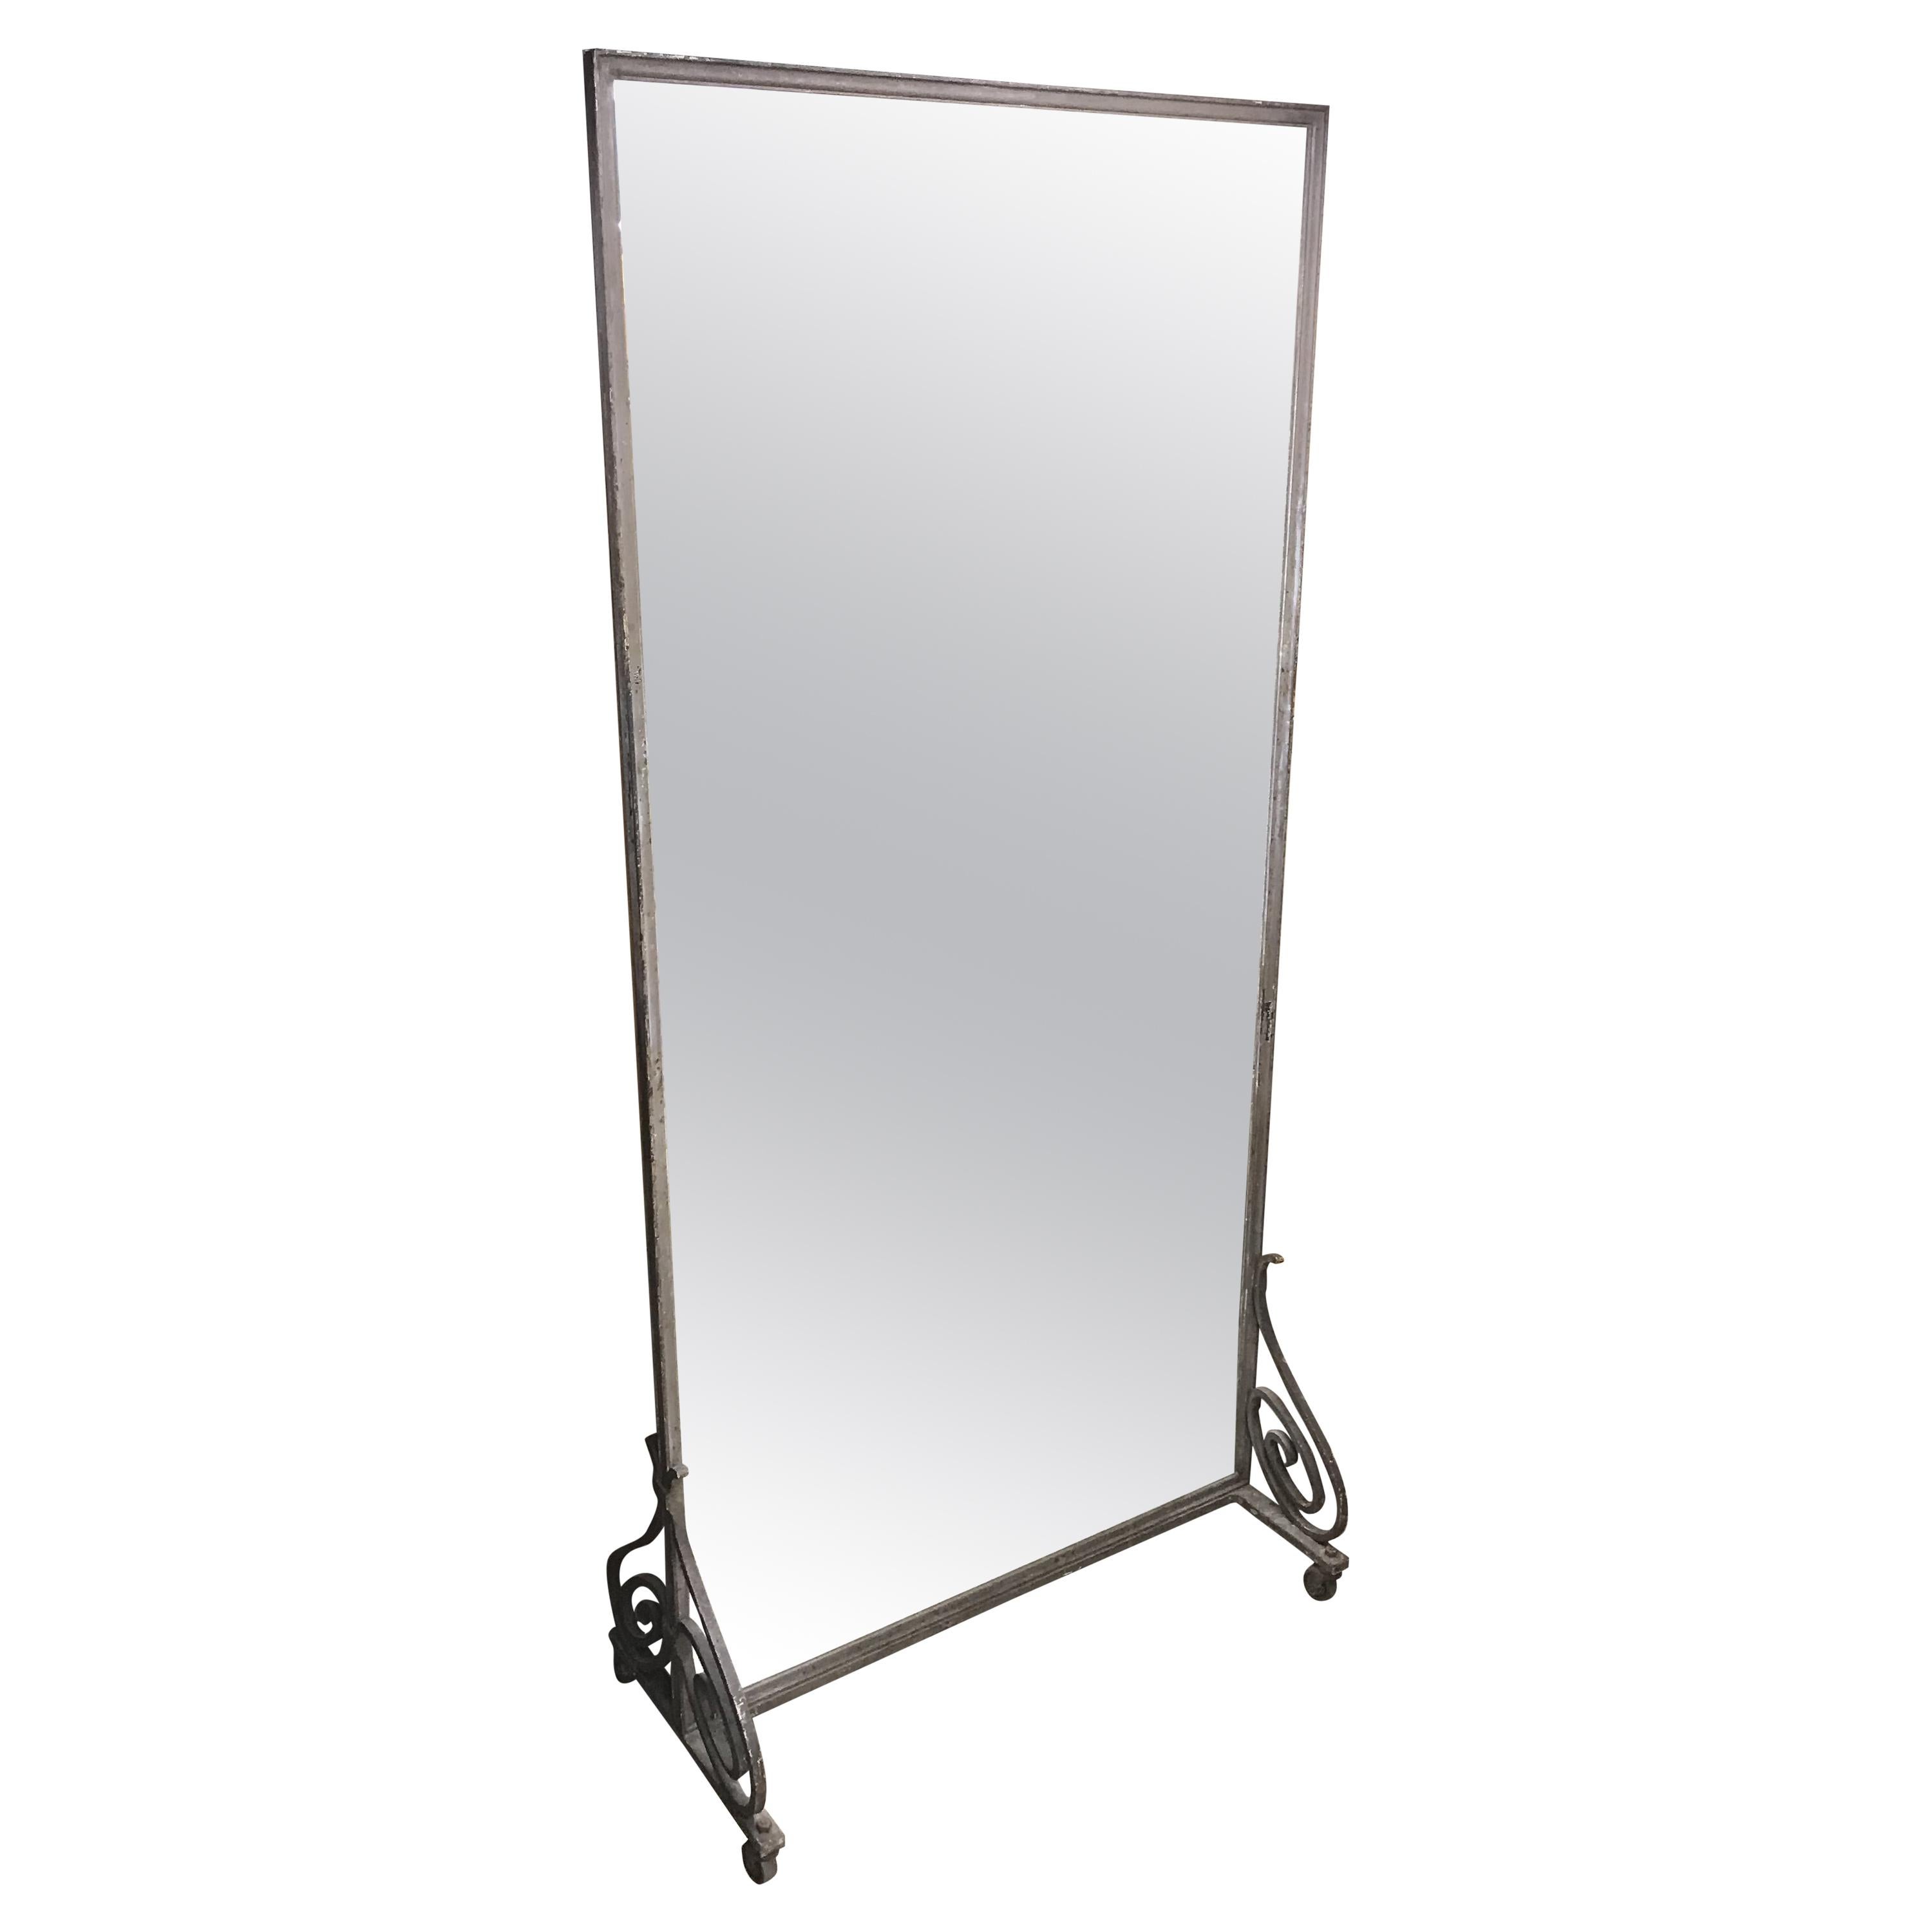 Art Deco Oversized Dressing Mirror in Metal and Wrought Iron Frame